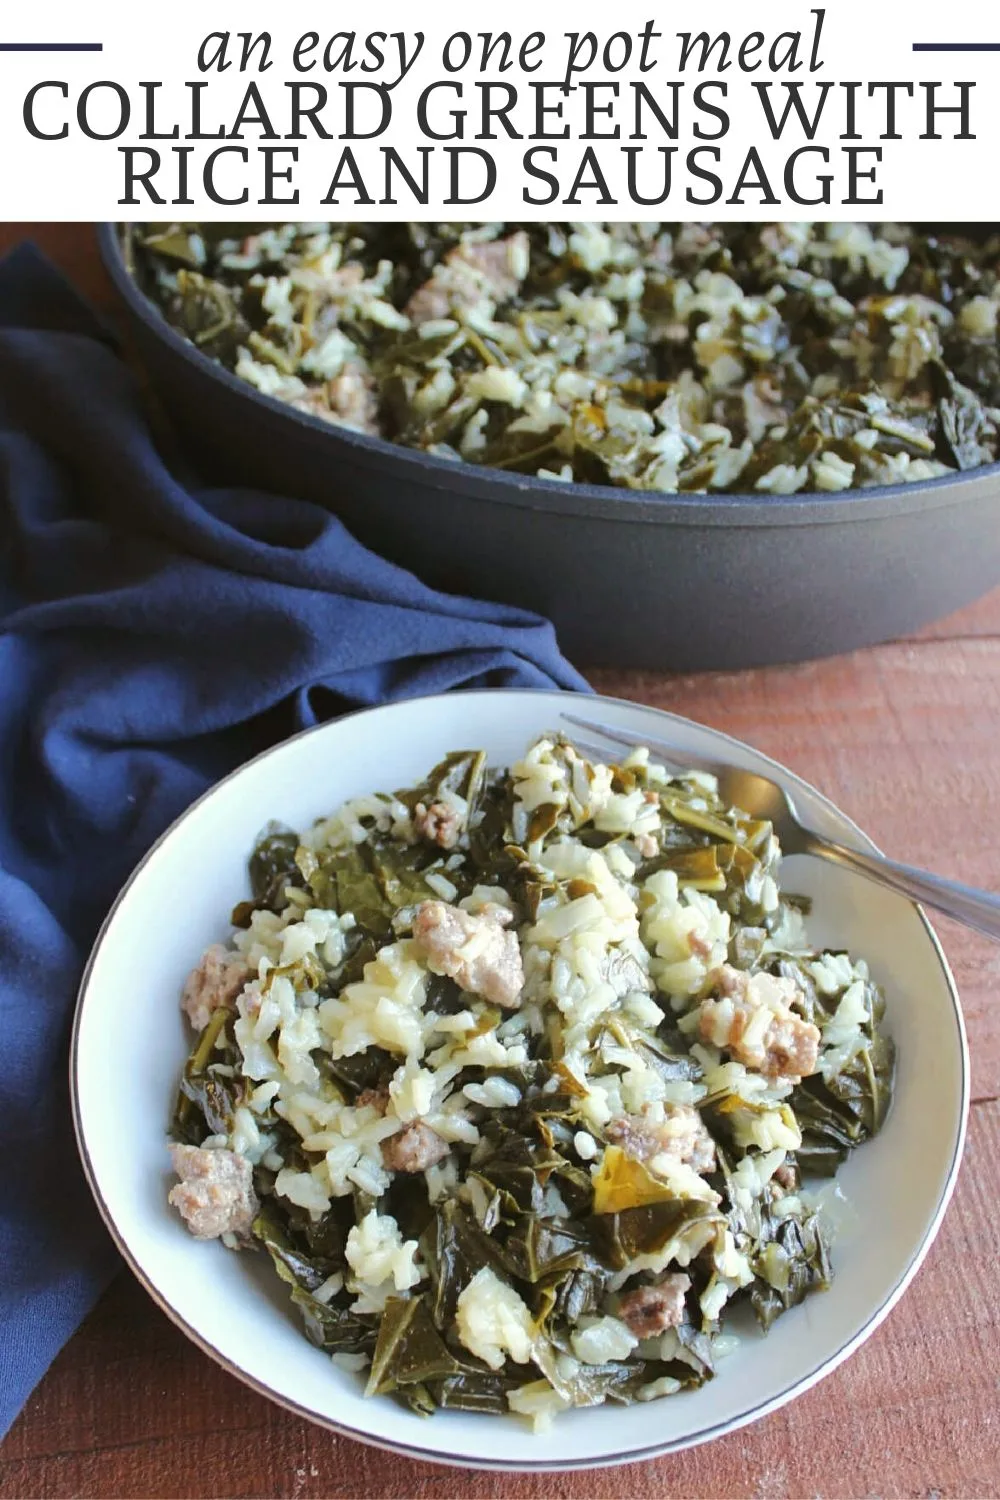 This flavorful one pot meal is full of Italian sausage, collard greens, and rice. Everything cooks together to make a hearty and delicious meal.